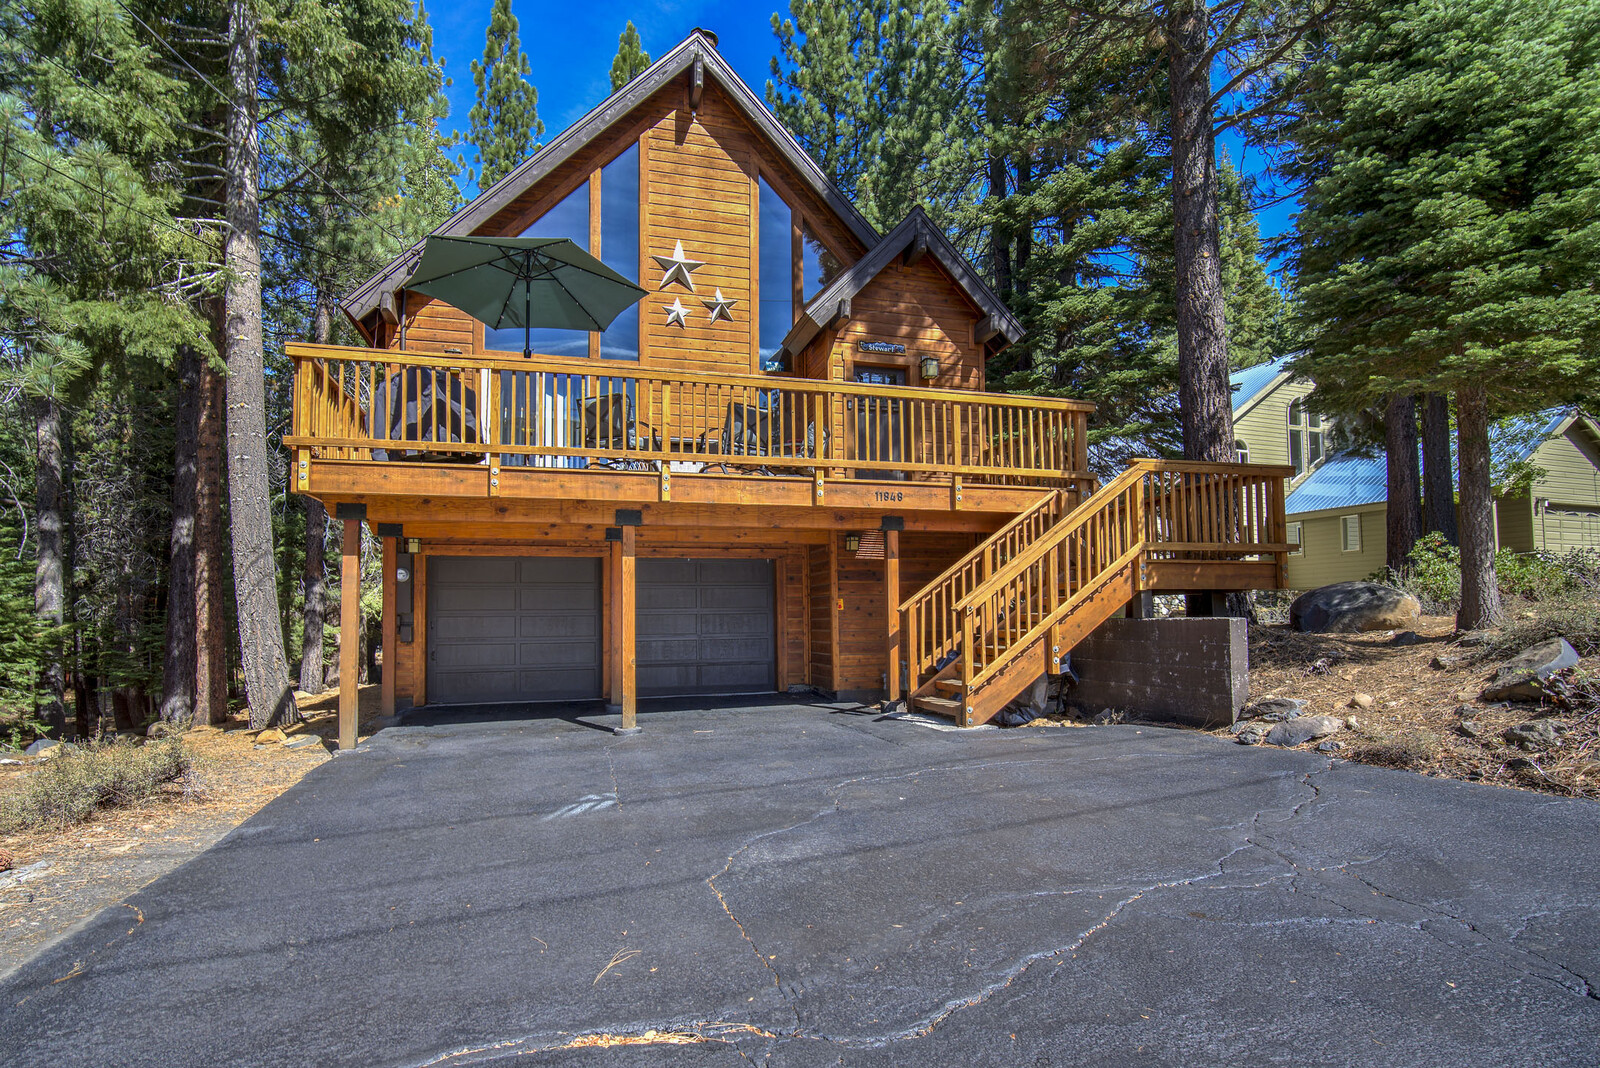 Tahoe Donner Low Elevation front view 1